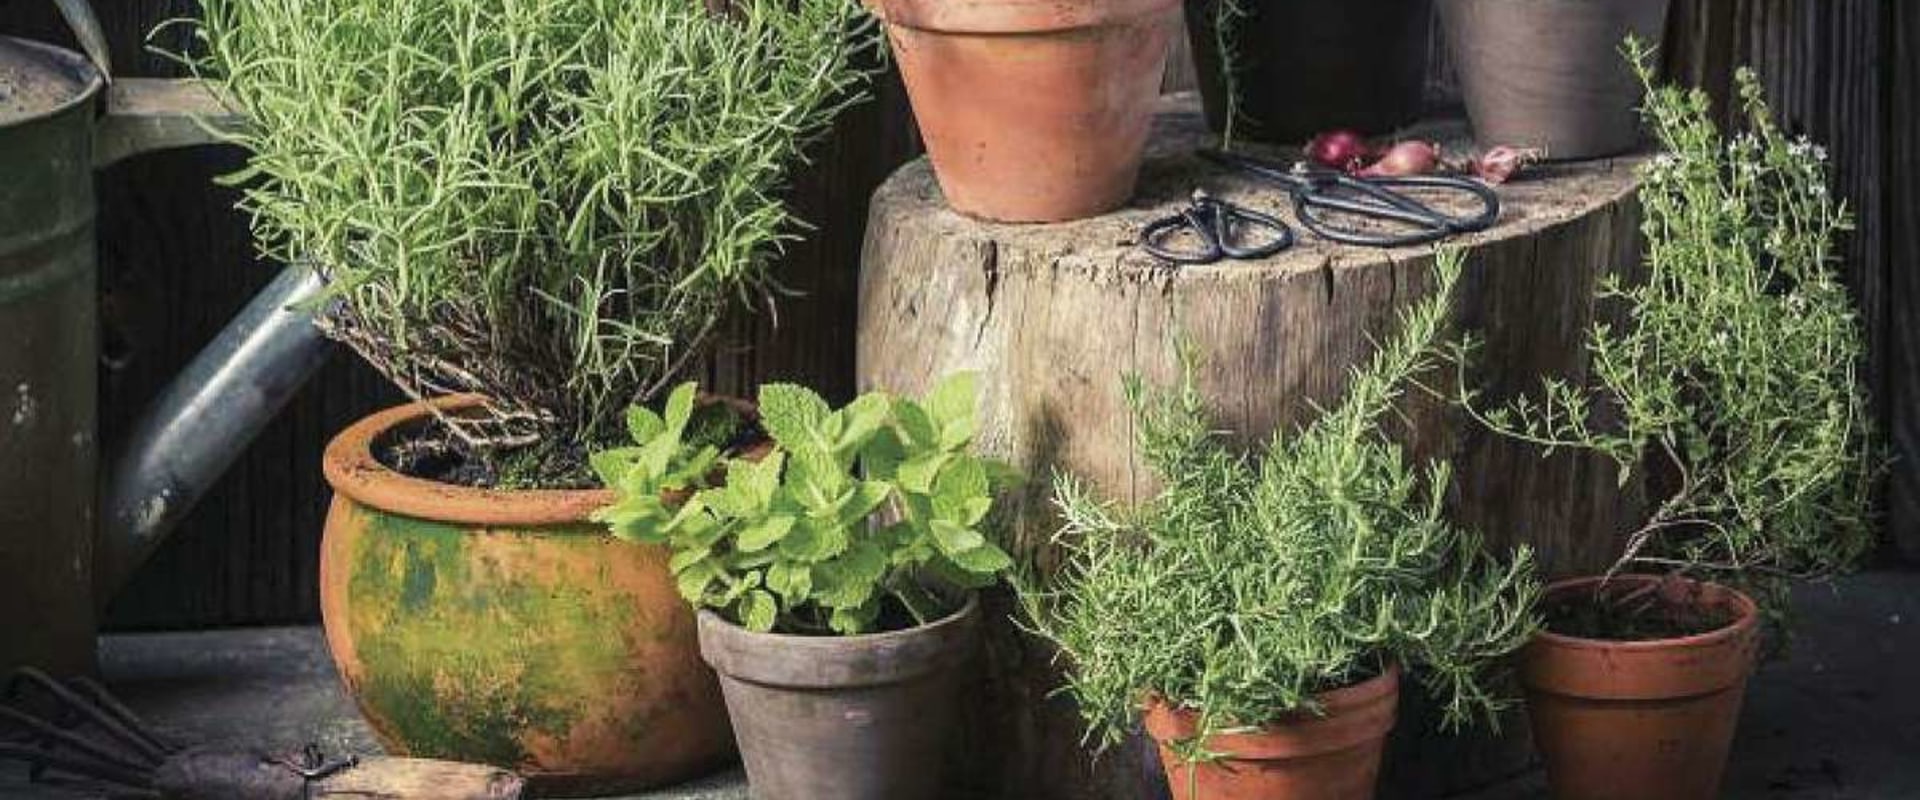 Growing Herbs Indoors in Travis County, Texas: The Best Fertilizers for Optimal Results